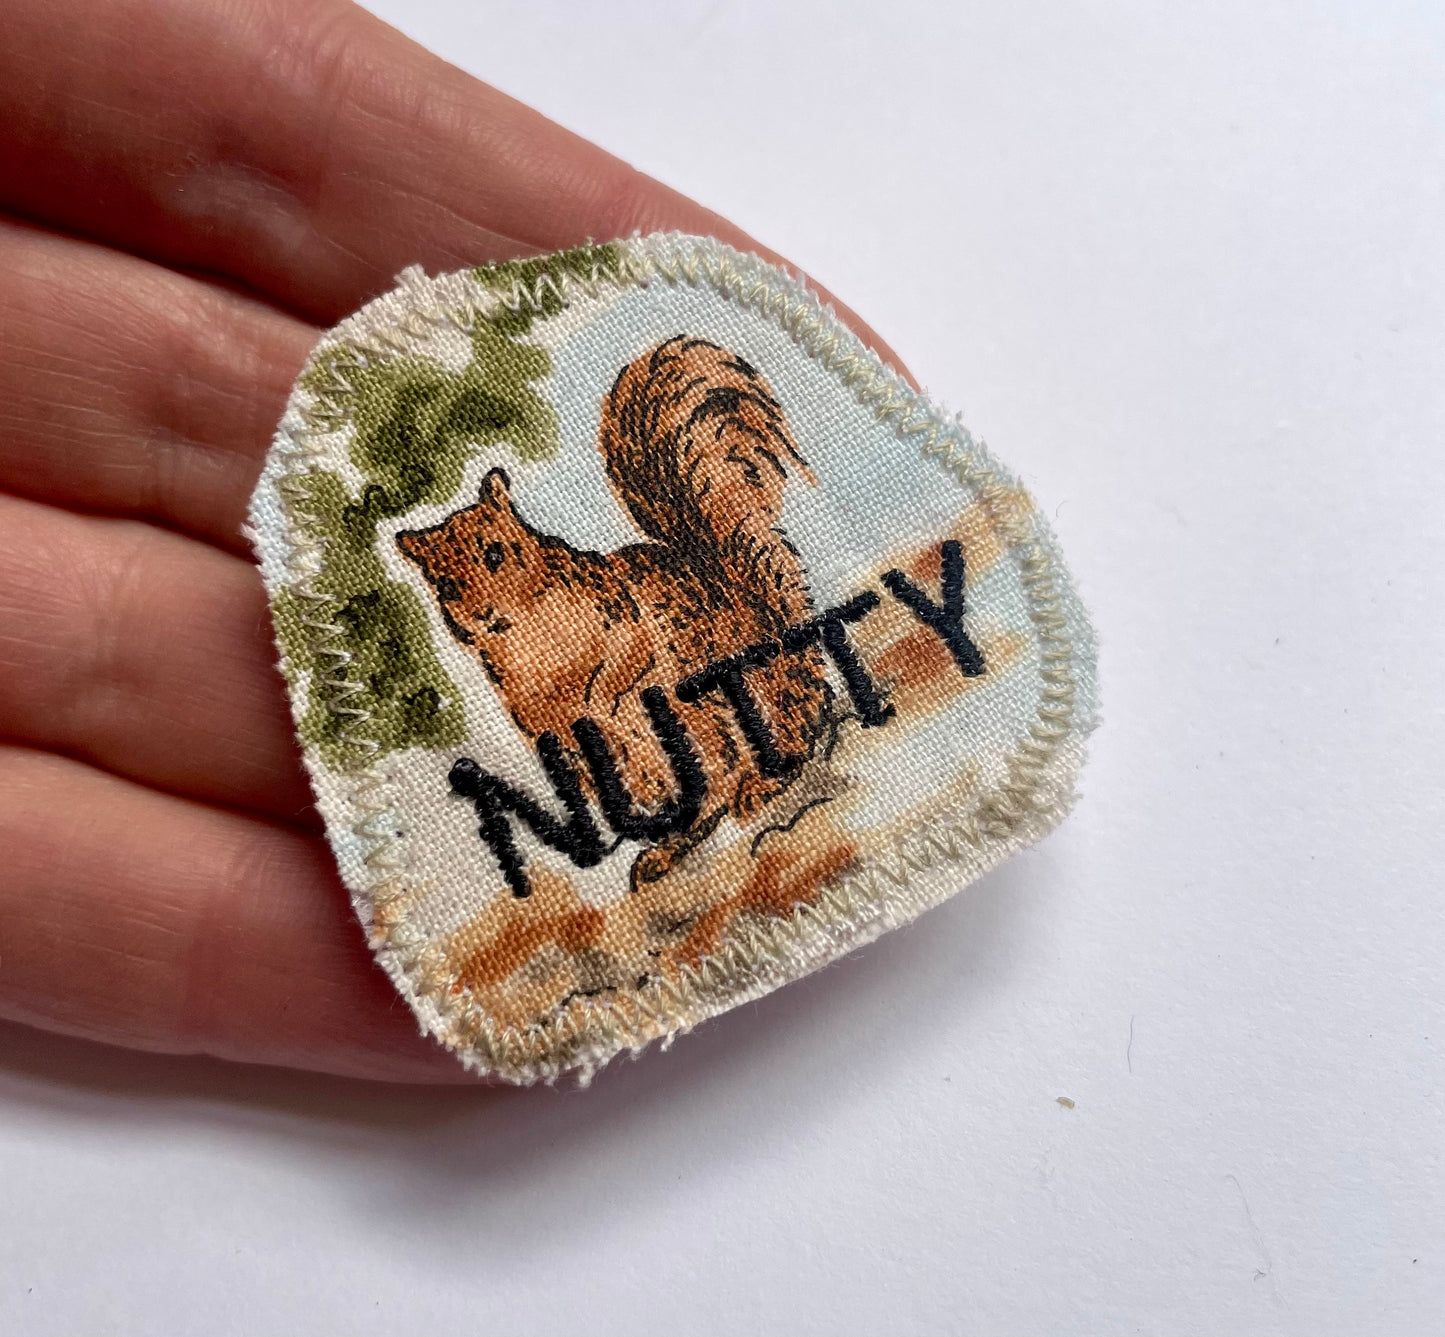 Hey Squirrel Friend. Nutty. Handmade Sustainable. Vintage Cotton Fabric Patch. Woodland Creature. One of a kind.